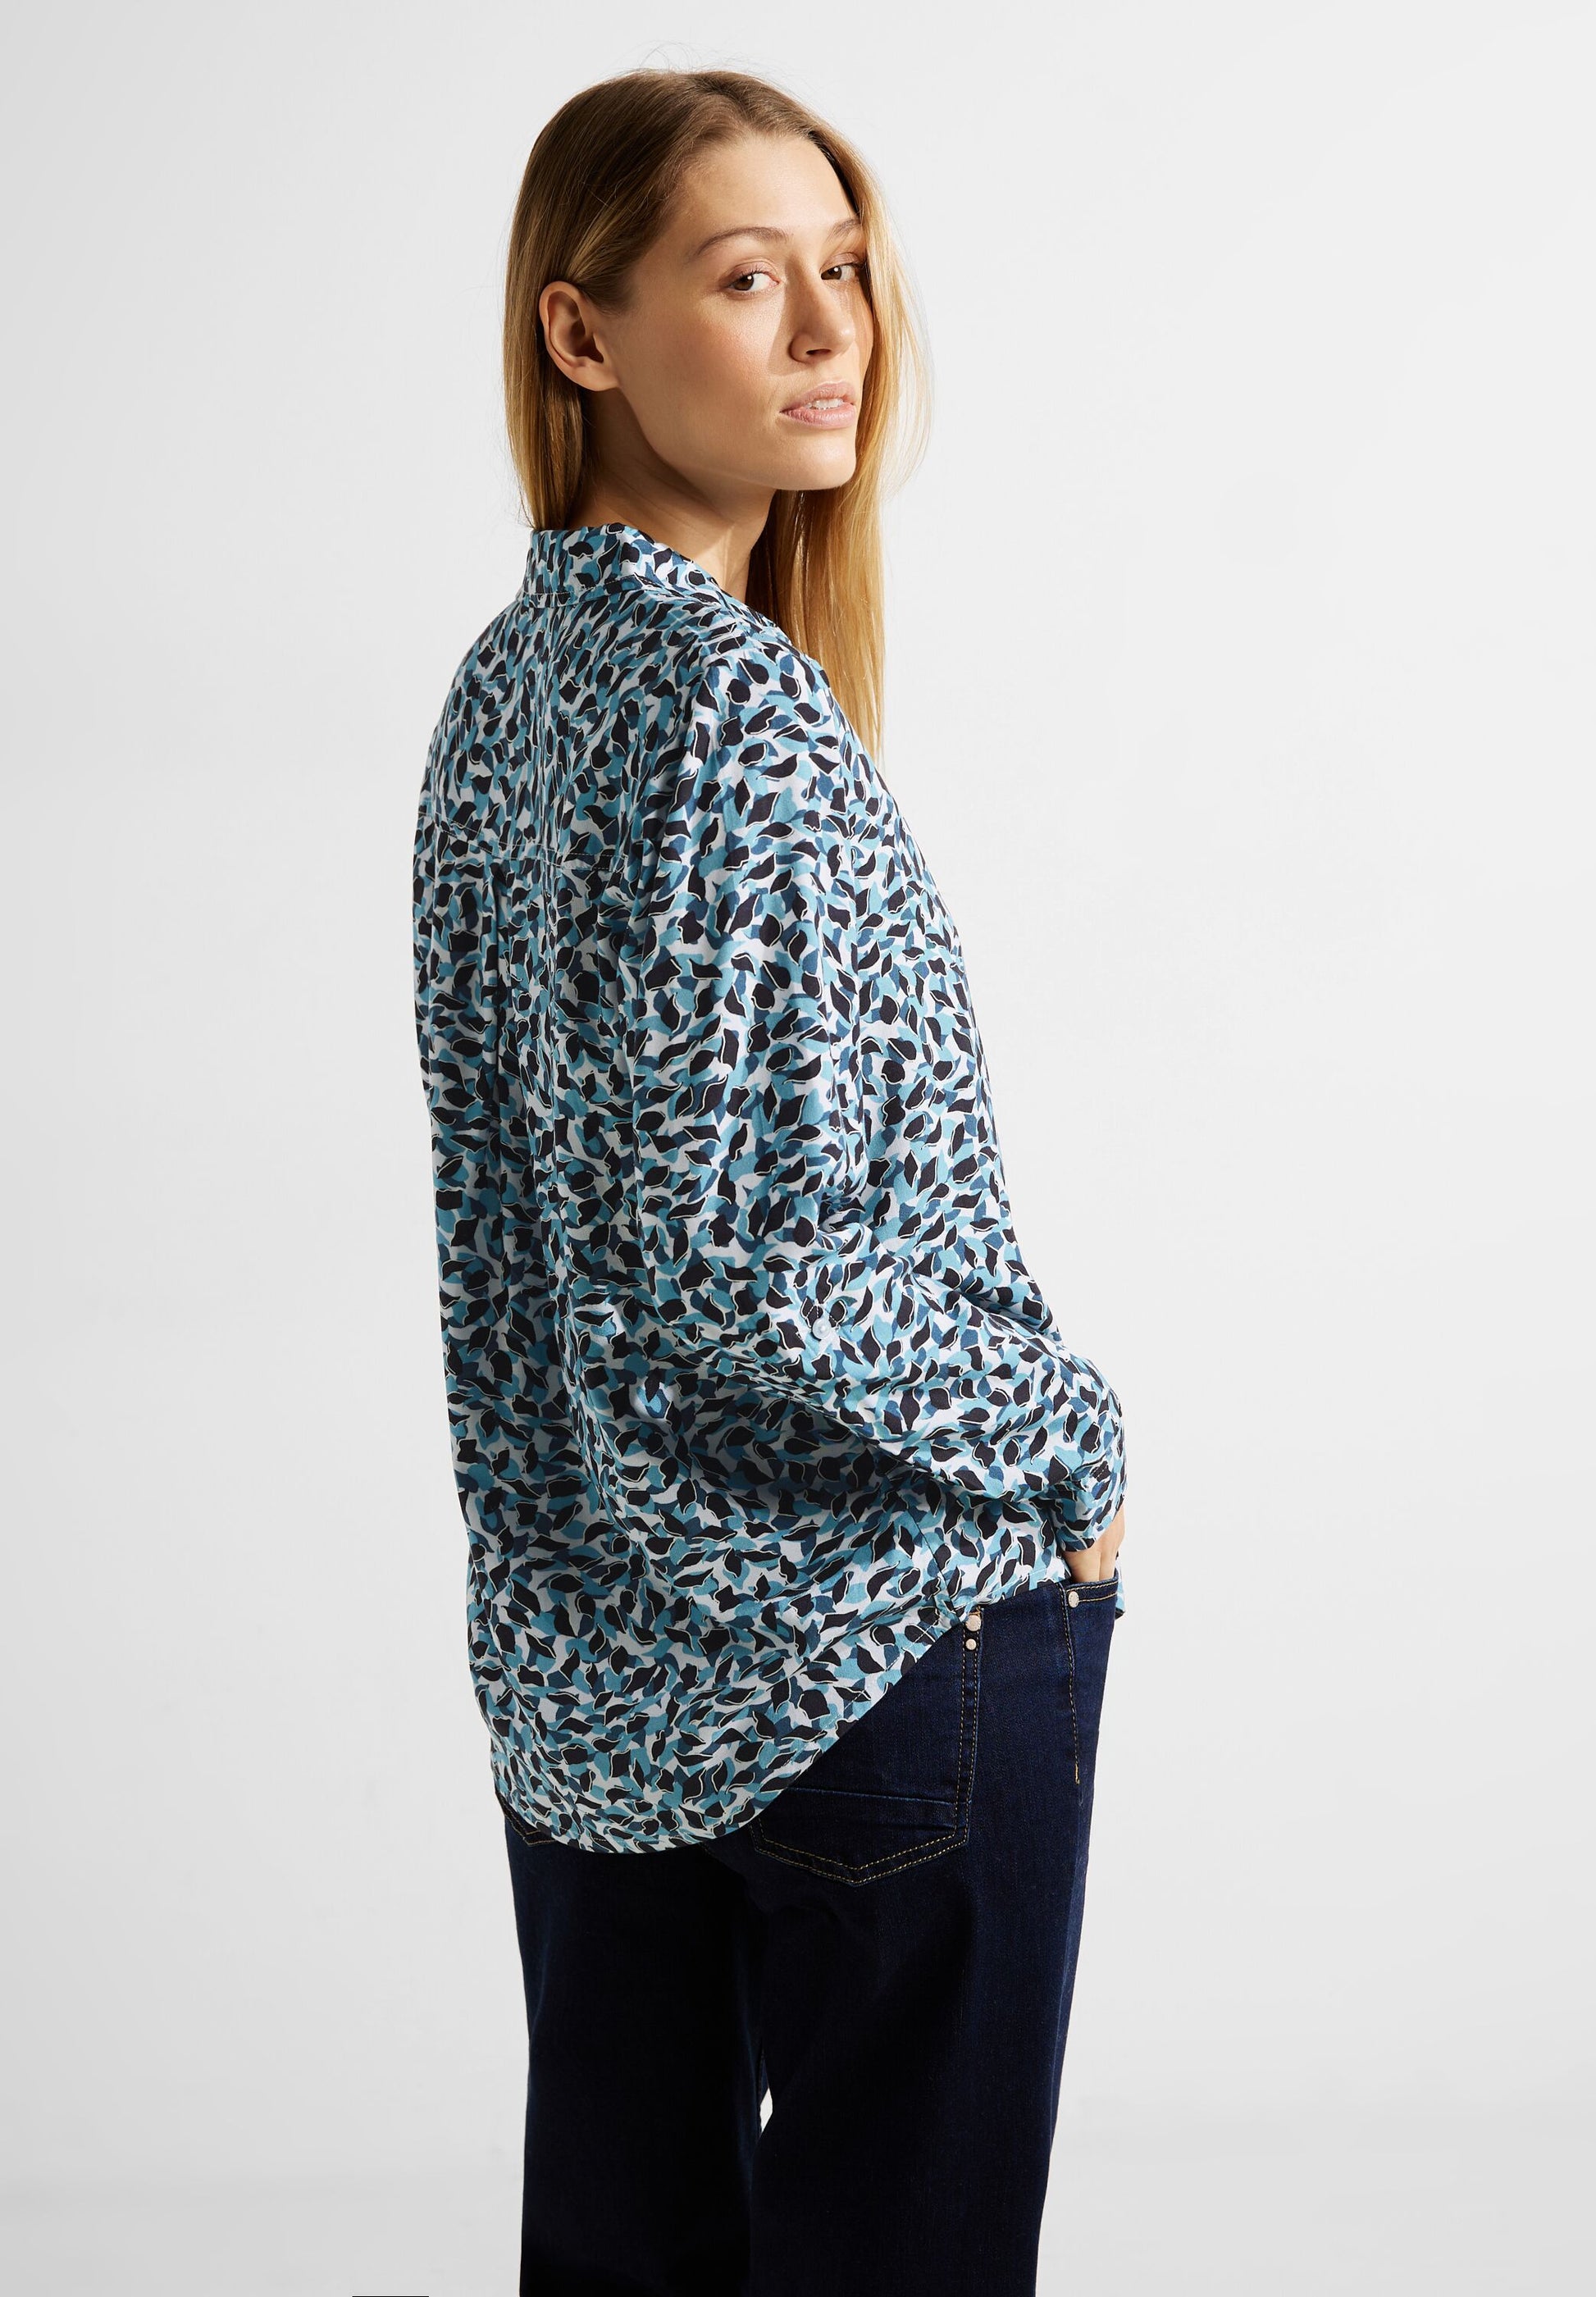 CECIL - Bluse Mode - Farbe: petrol Print mit grafischem – strong blue TWISTY